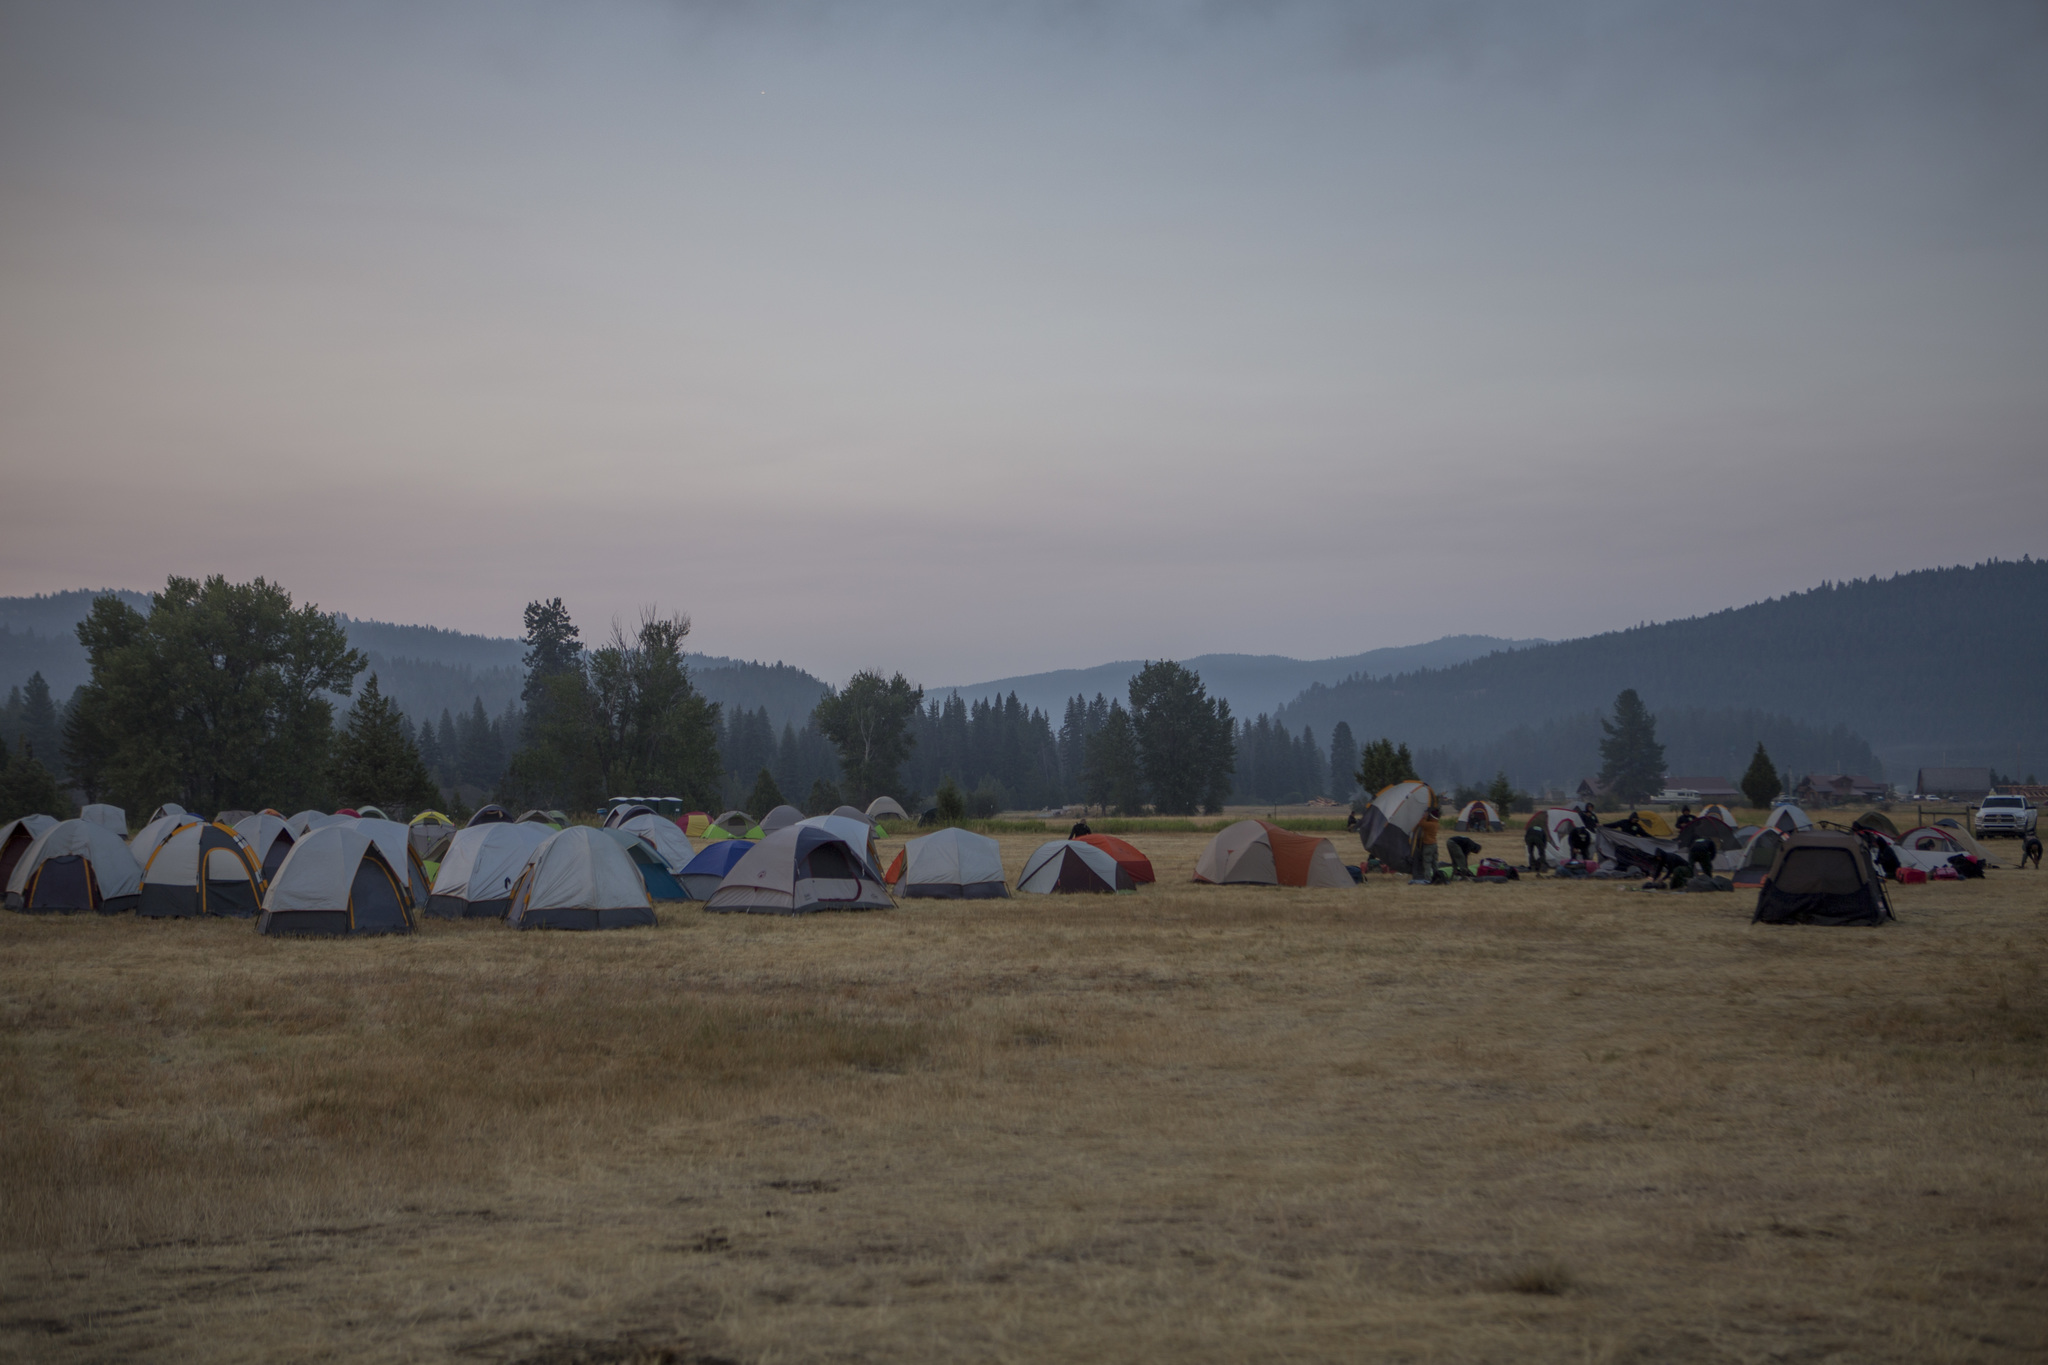 A fire incident basecamps with multiple tents set up in an open field under a smokey sky.